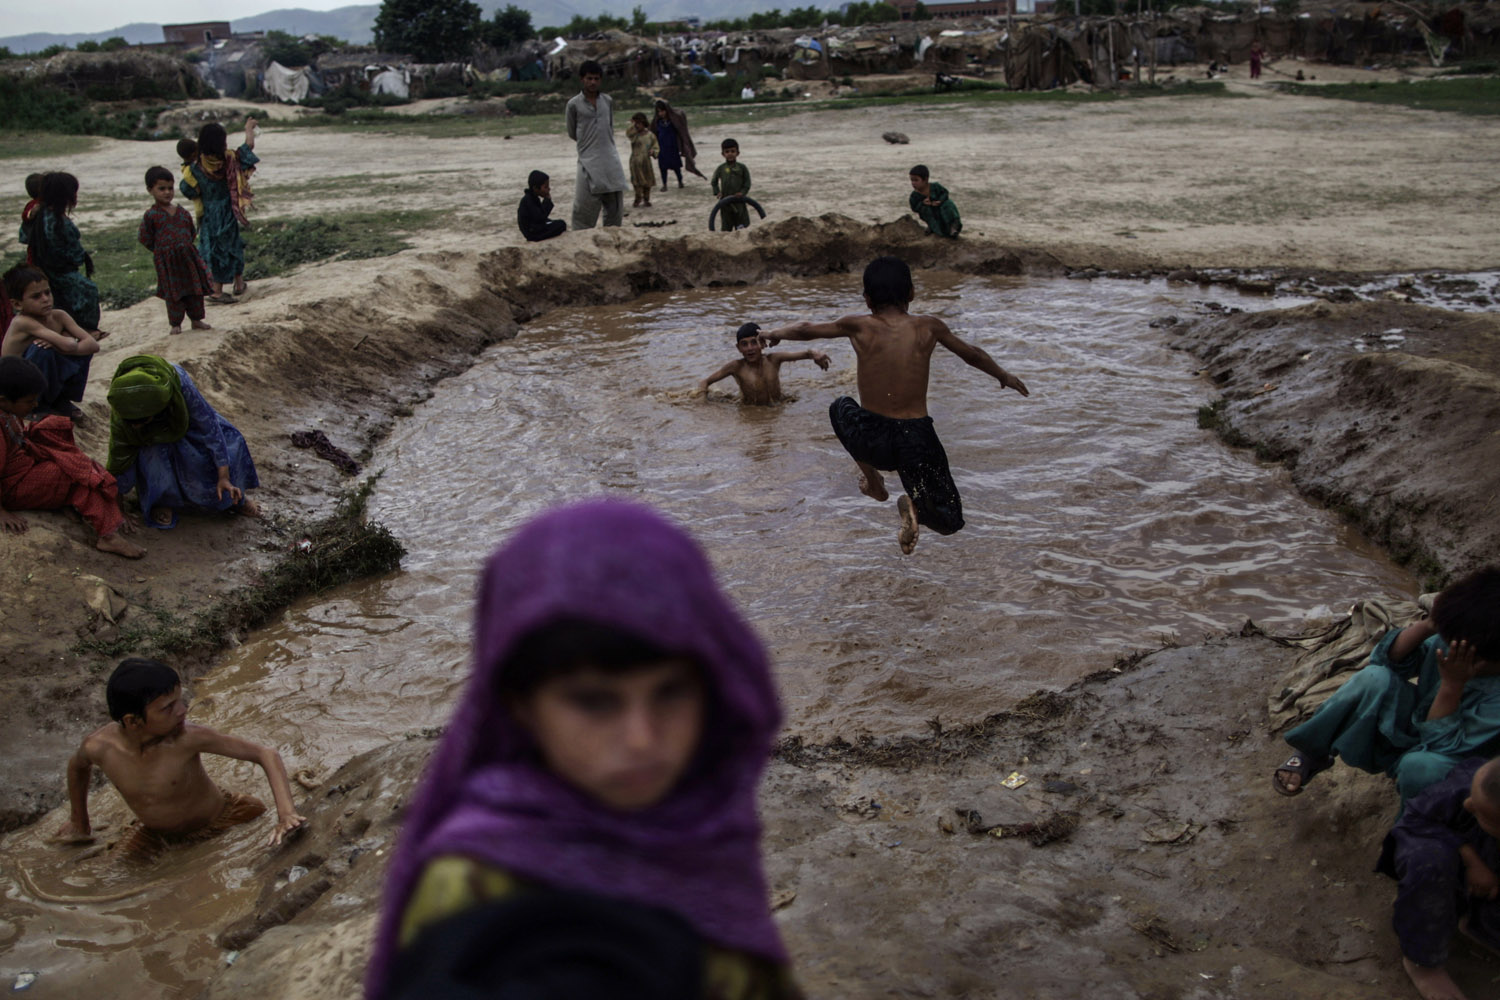 June 17, 2013. Afghan refugee children swim in muddy water created from a broken water pipe on the outskirts of Islamabad.